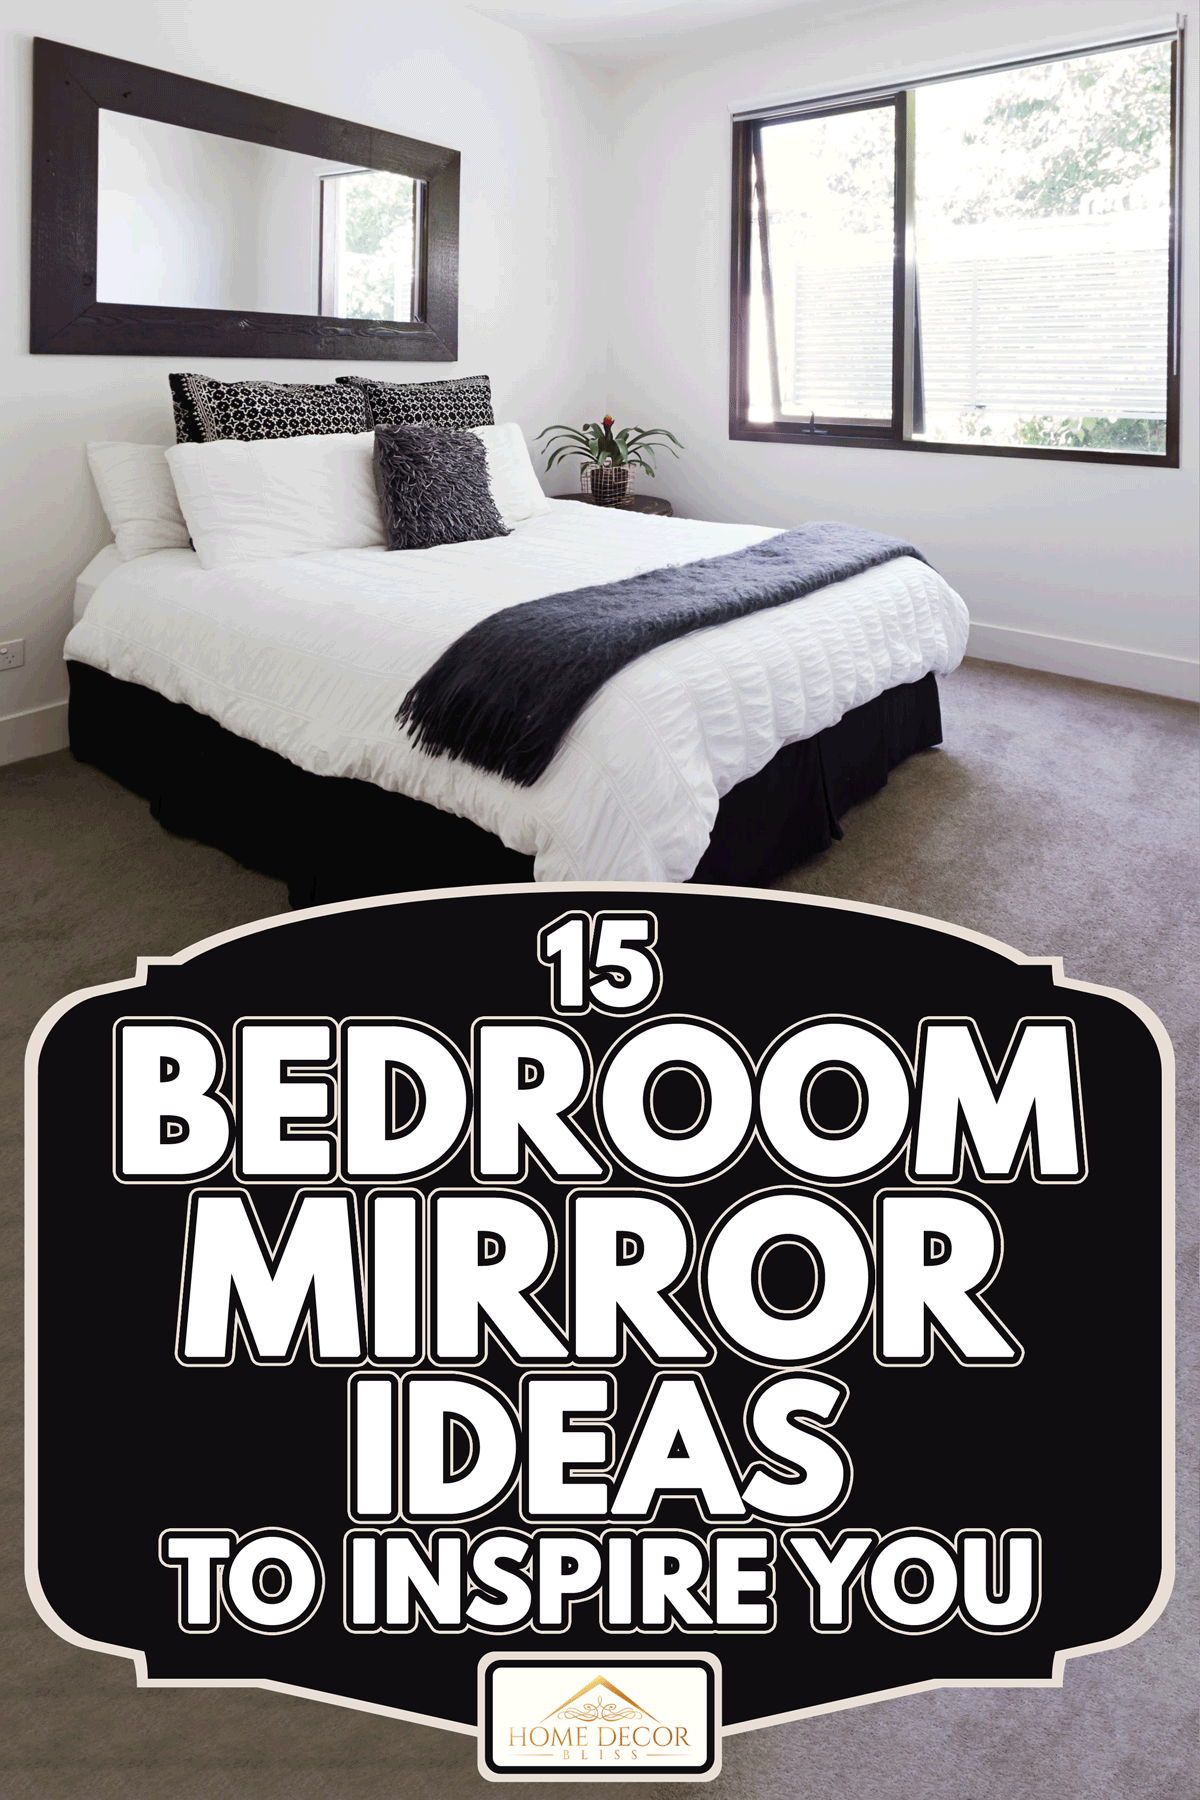 Big mirror in a black and white themed bedroom, 15 Bedroom Mirror Ideas To Inspire You